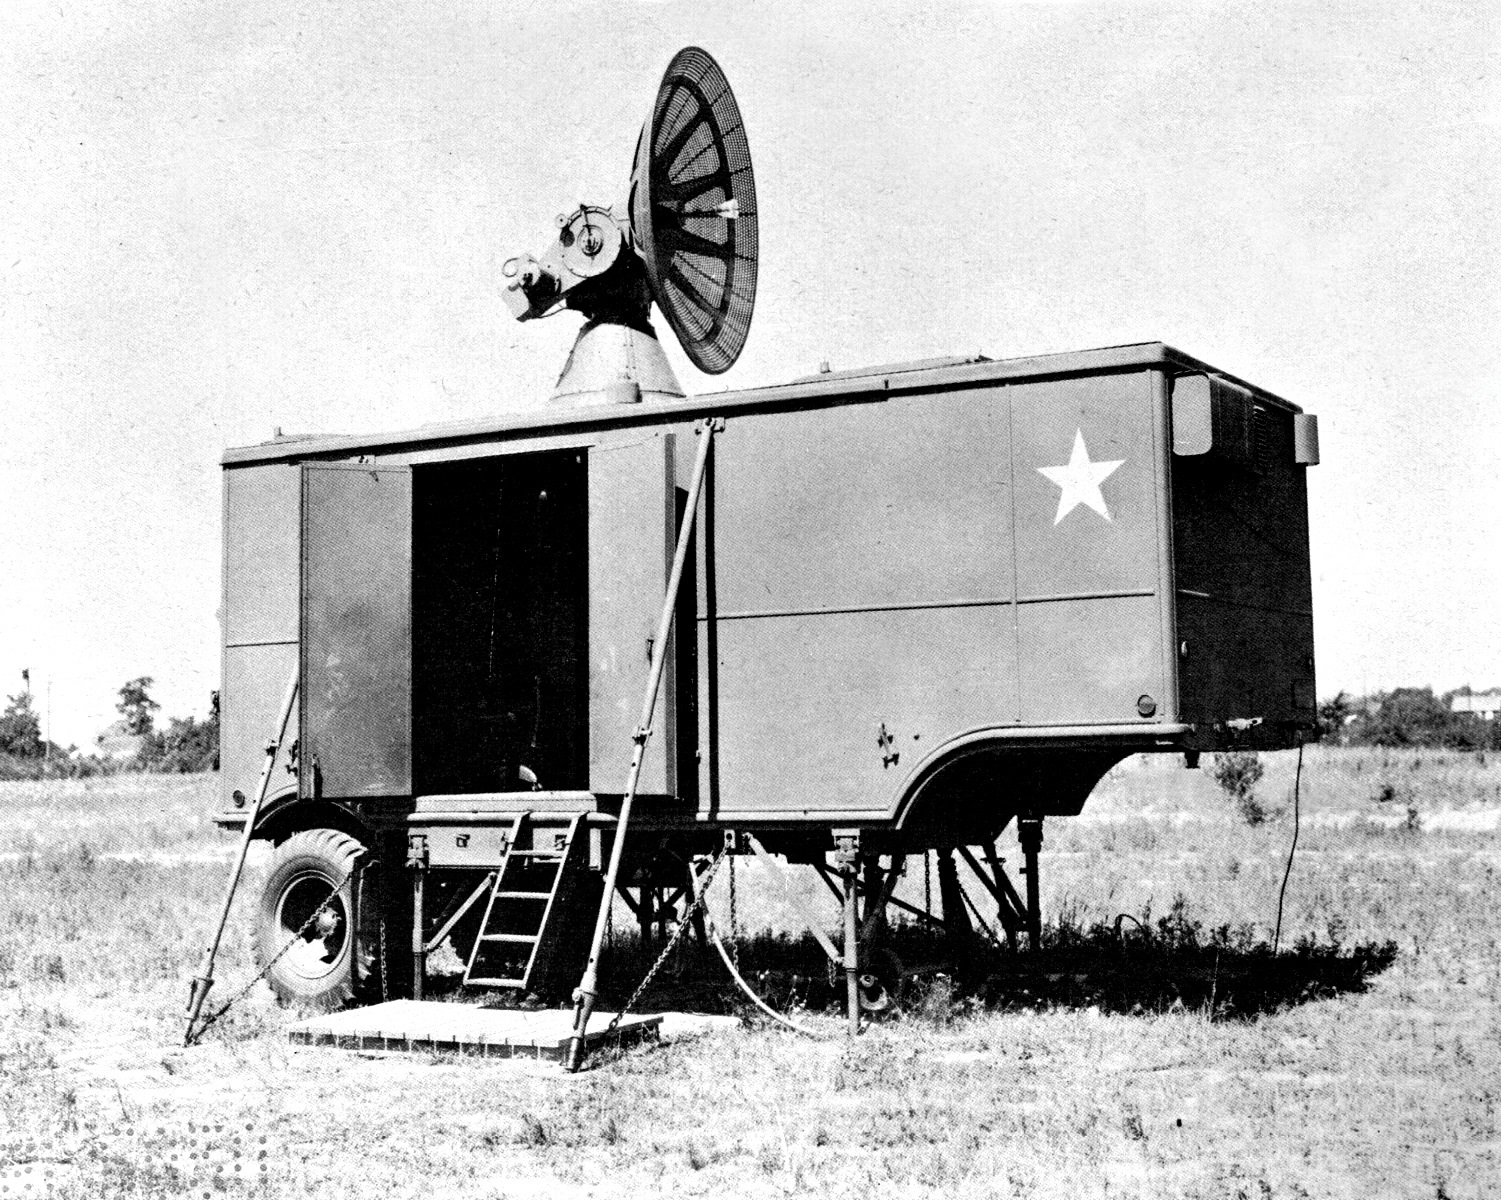 A photograph of a trailer carrying the SCR-584 radar system. 